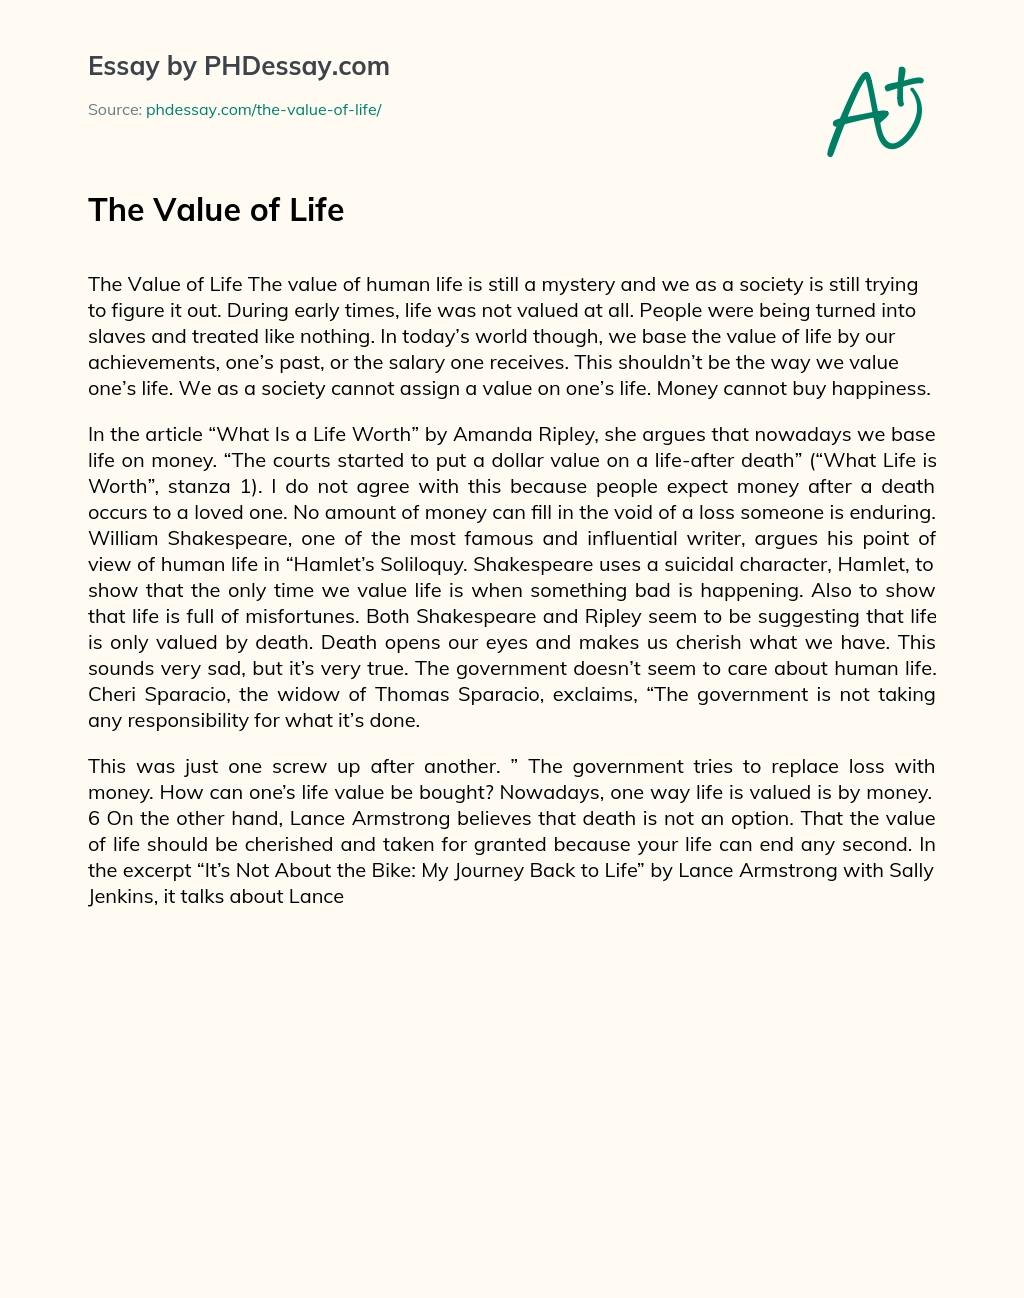 The Value of Life essay